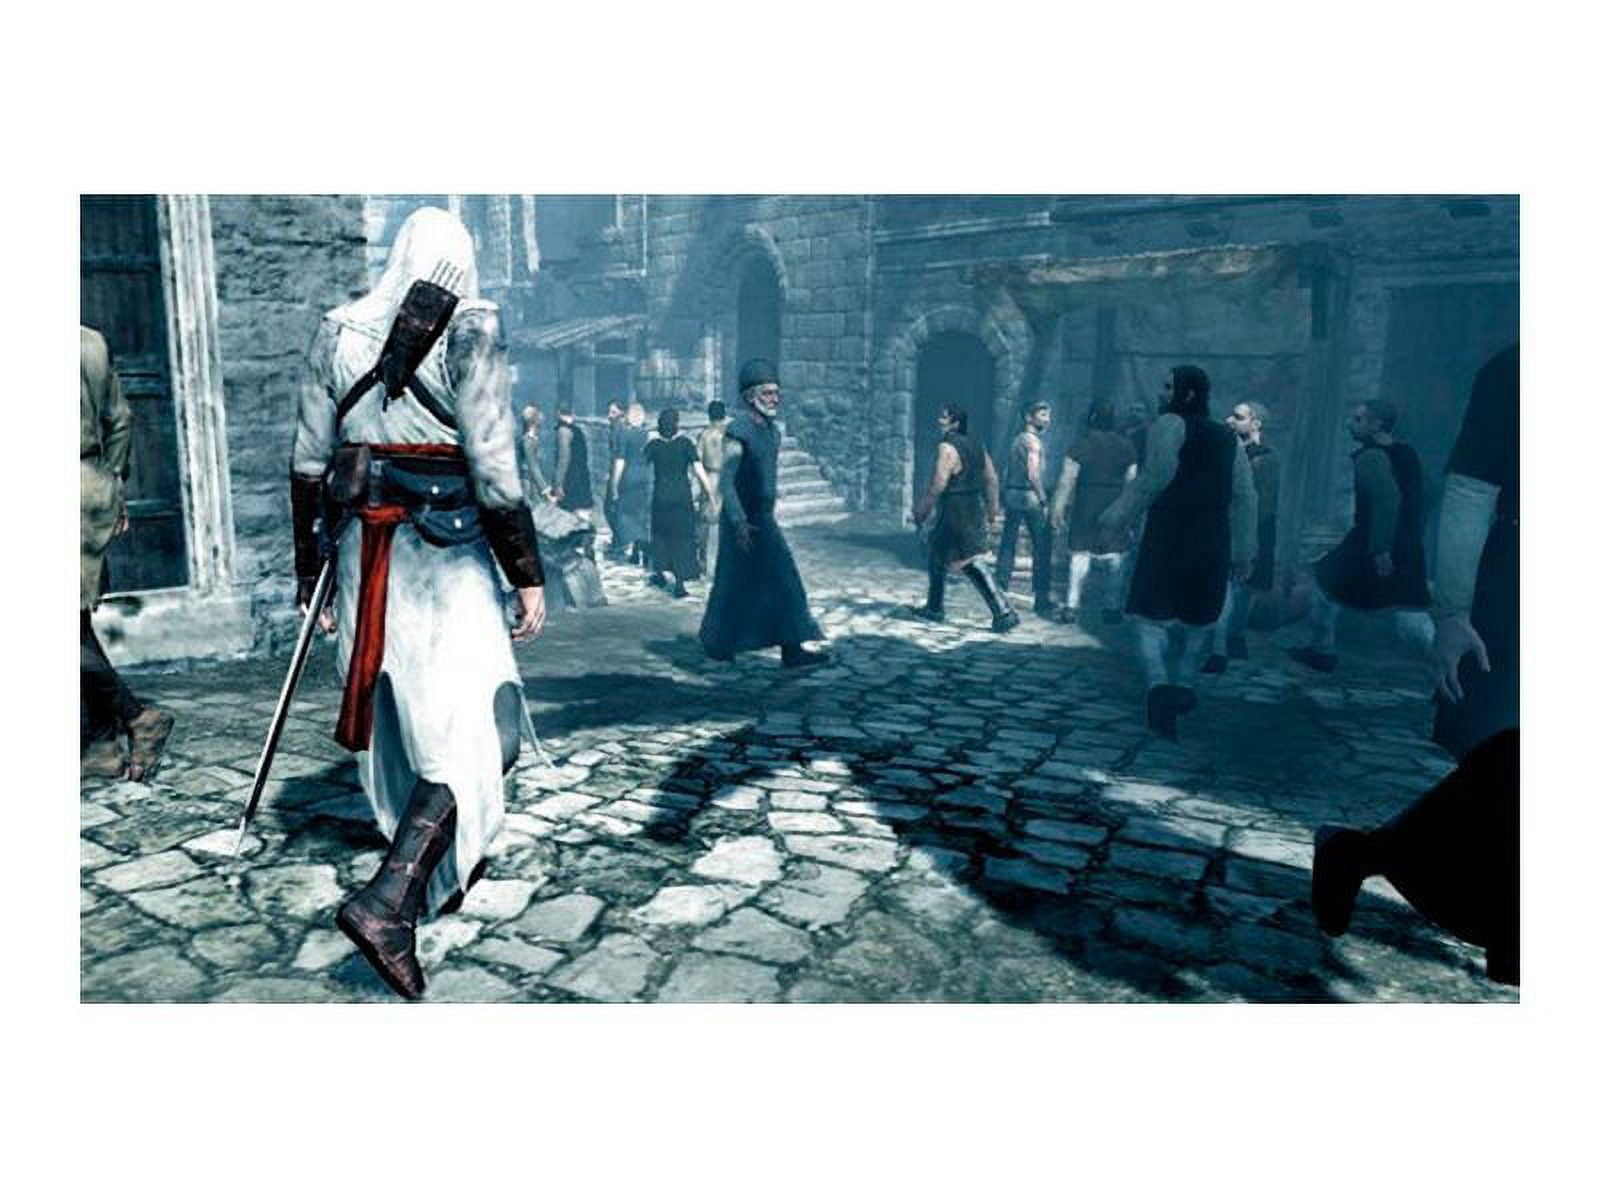 100% SaveGame] 📥 Assassins Creed Bloodlines PSP - Everything is